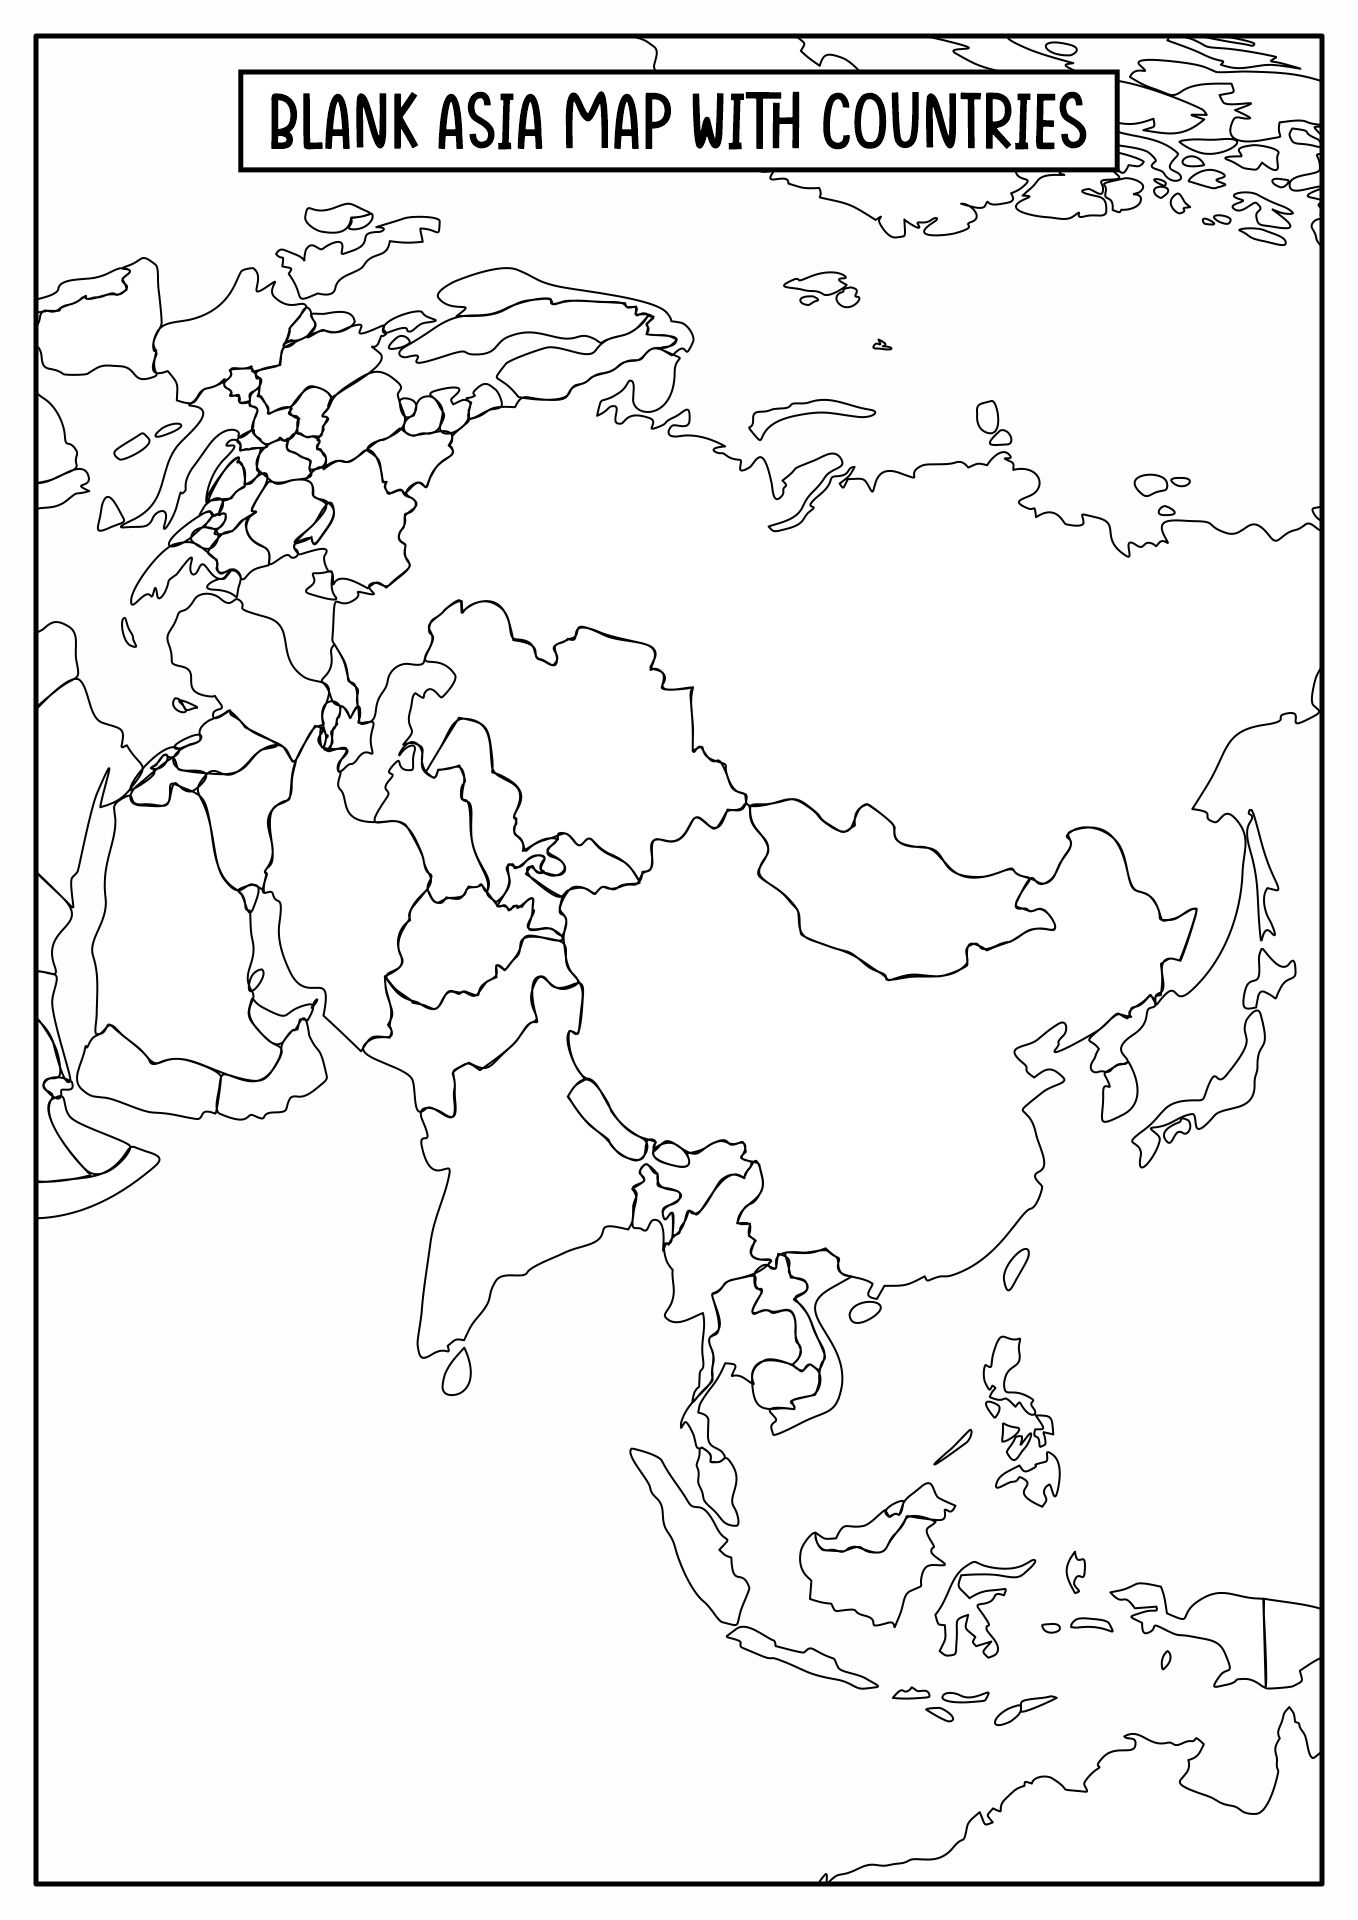 7-best-images-of-asia-blank-map-worksheets-printable-blank-asia-map